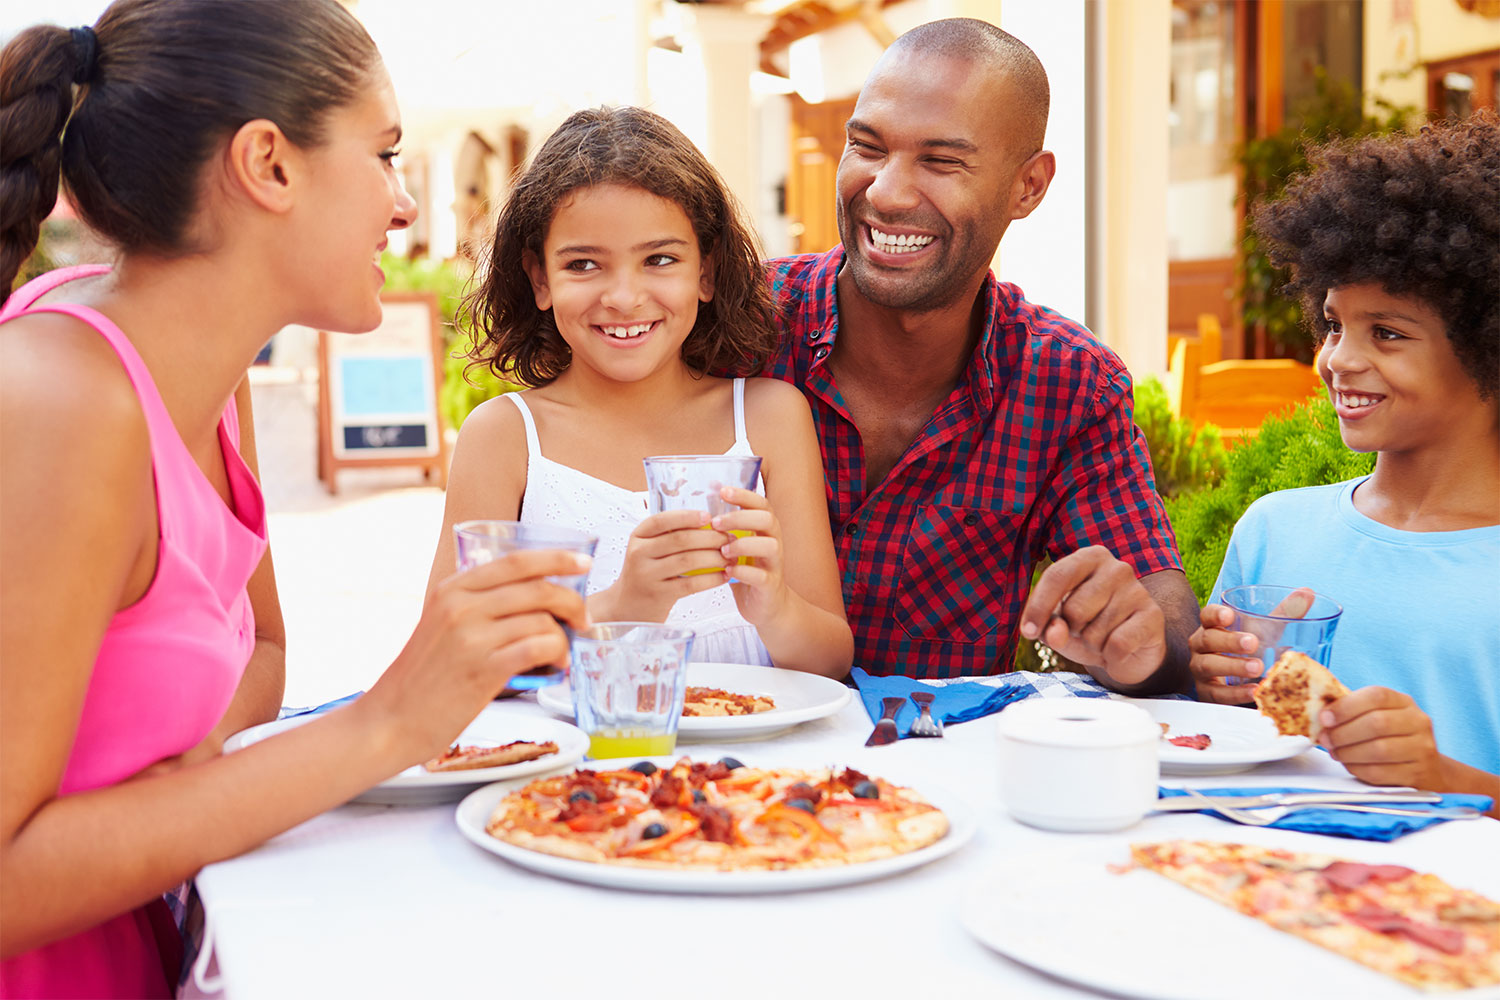 The 5 Best Restaurants for Kids of All Ages | NewFolks